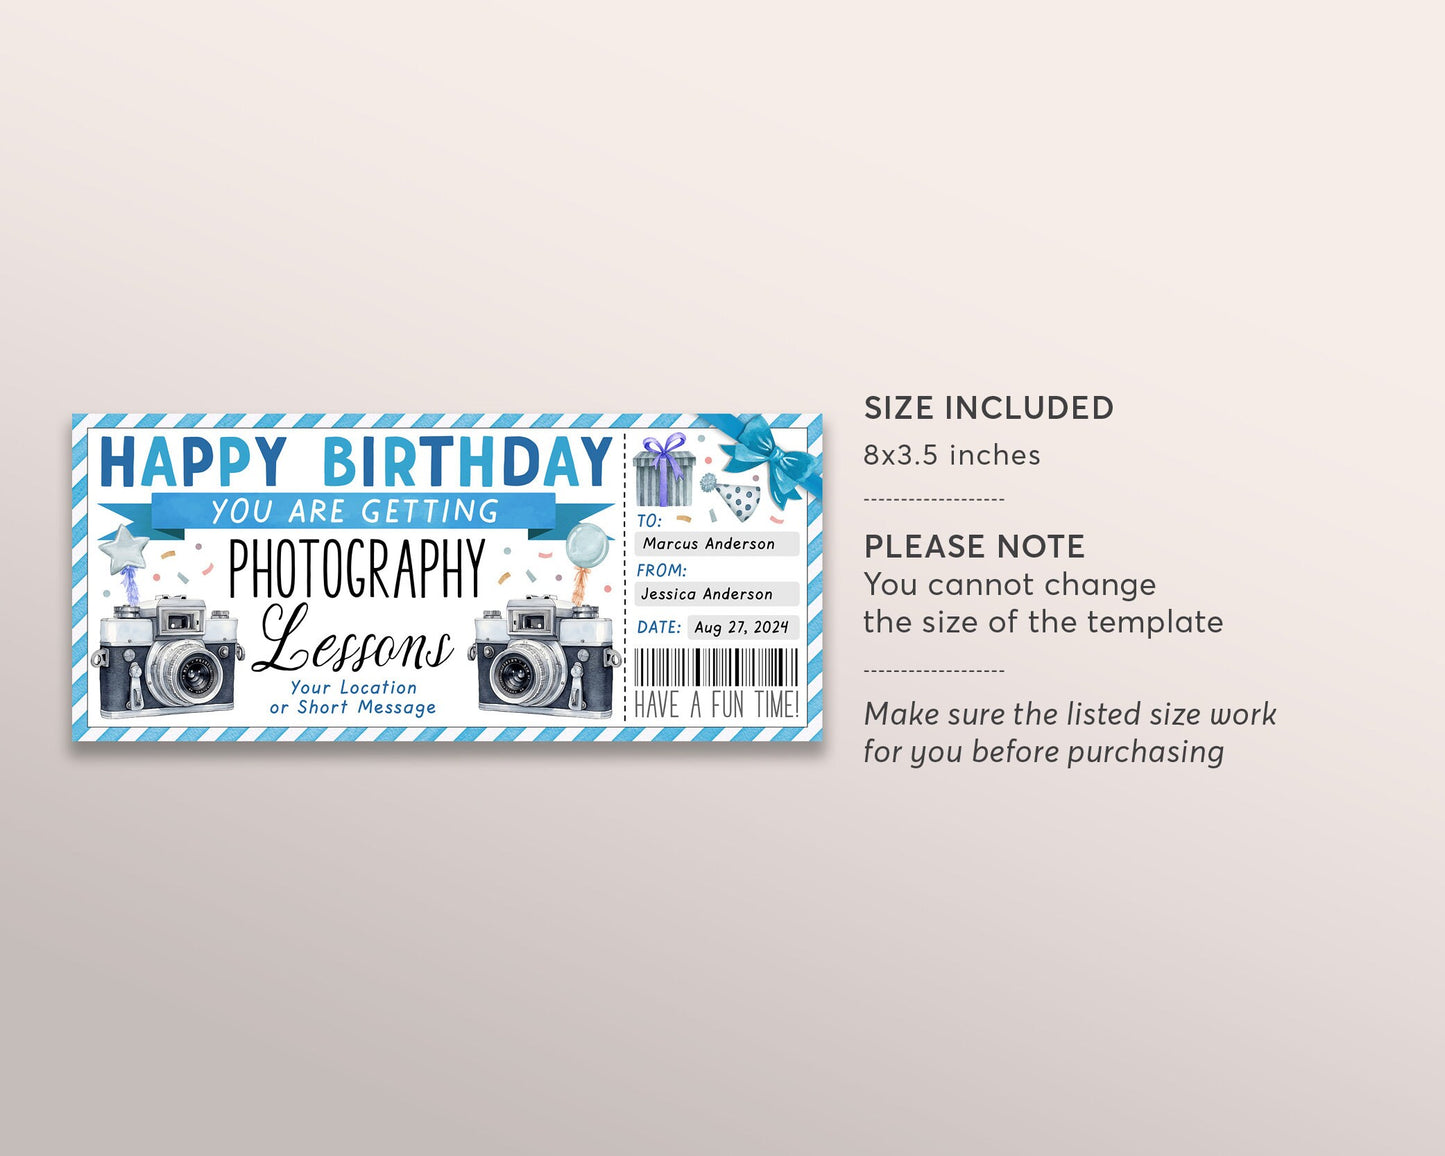 Photography Lessons Gift Voucher Ticket Editable Template, Birthday Photography Classes Gift Certificate For Her, Surprise Camera Coupon